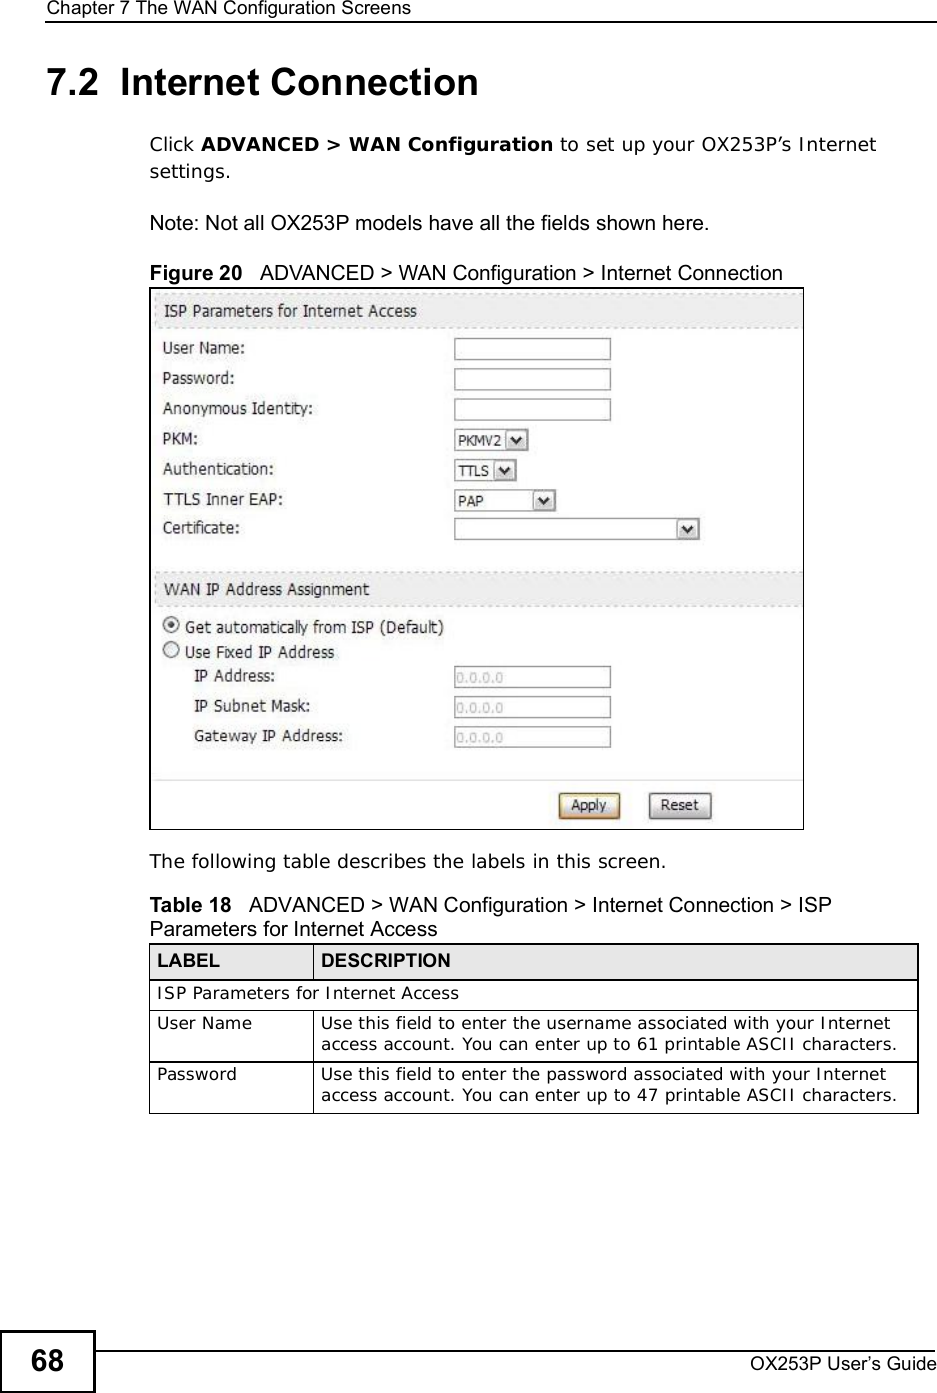 Chapter 7The WAN Configuration ScreensOX253P User’s Guide687.2  Internet ConnectionClick ADVANCED &gt; WAN Configuration to set up your OX253P’s Internet settings.Note: Not all OX253P models have all the fields shown here.Figure 20   ADVANCED &gt; WAN Configuration &gt; Internet ConnectionThe following table describes the labels in this screen.  Table 18   ADVANCED &gt; WAN Configuration &gt; Internet Connection &gt; ISP Parameters for Internet AccessLABEL DESCRIPTIONISP Parameters for Internet AccessUser NameUse this field to enter the username associated with your Internet access account. You can enter up to 61 printable ASCII characters.PasswordUse this field to enter the password associated with your Internet access account. You can enter up to 47 printable ASCII characters.